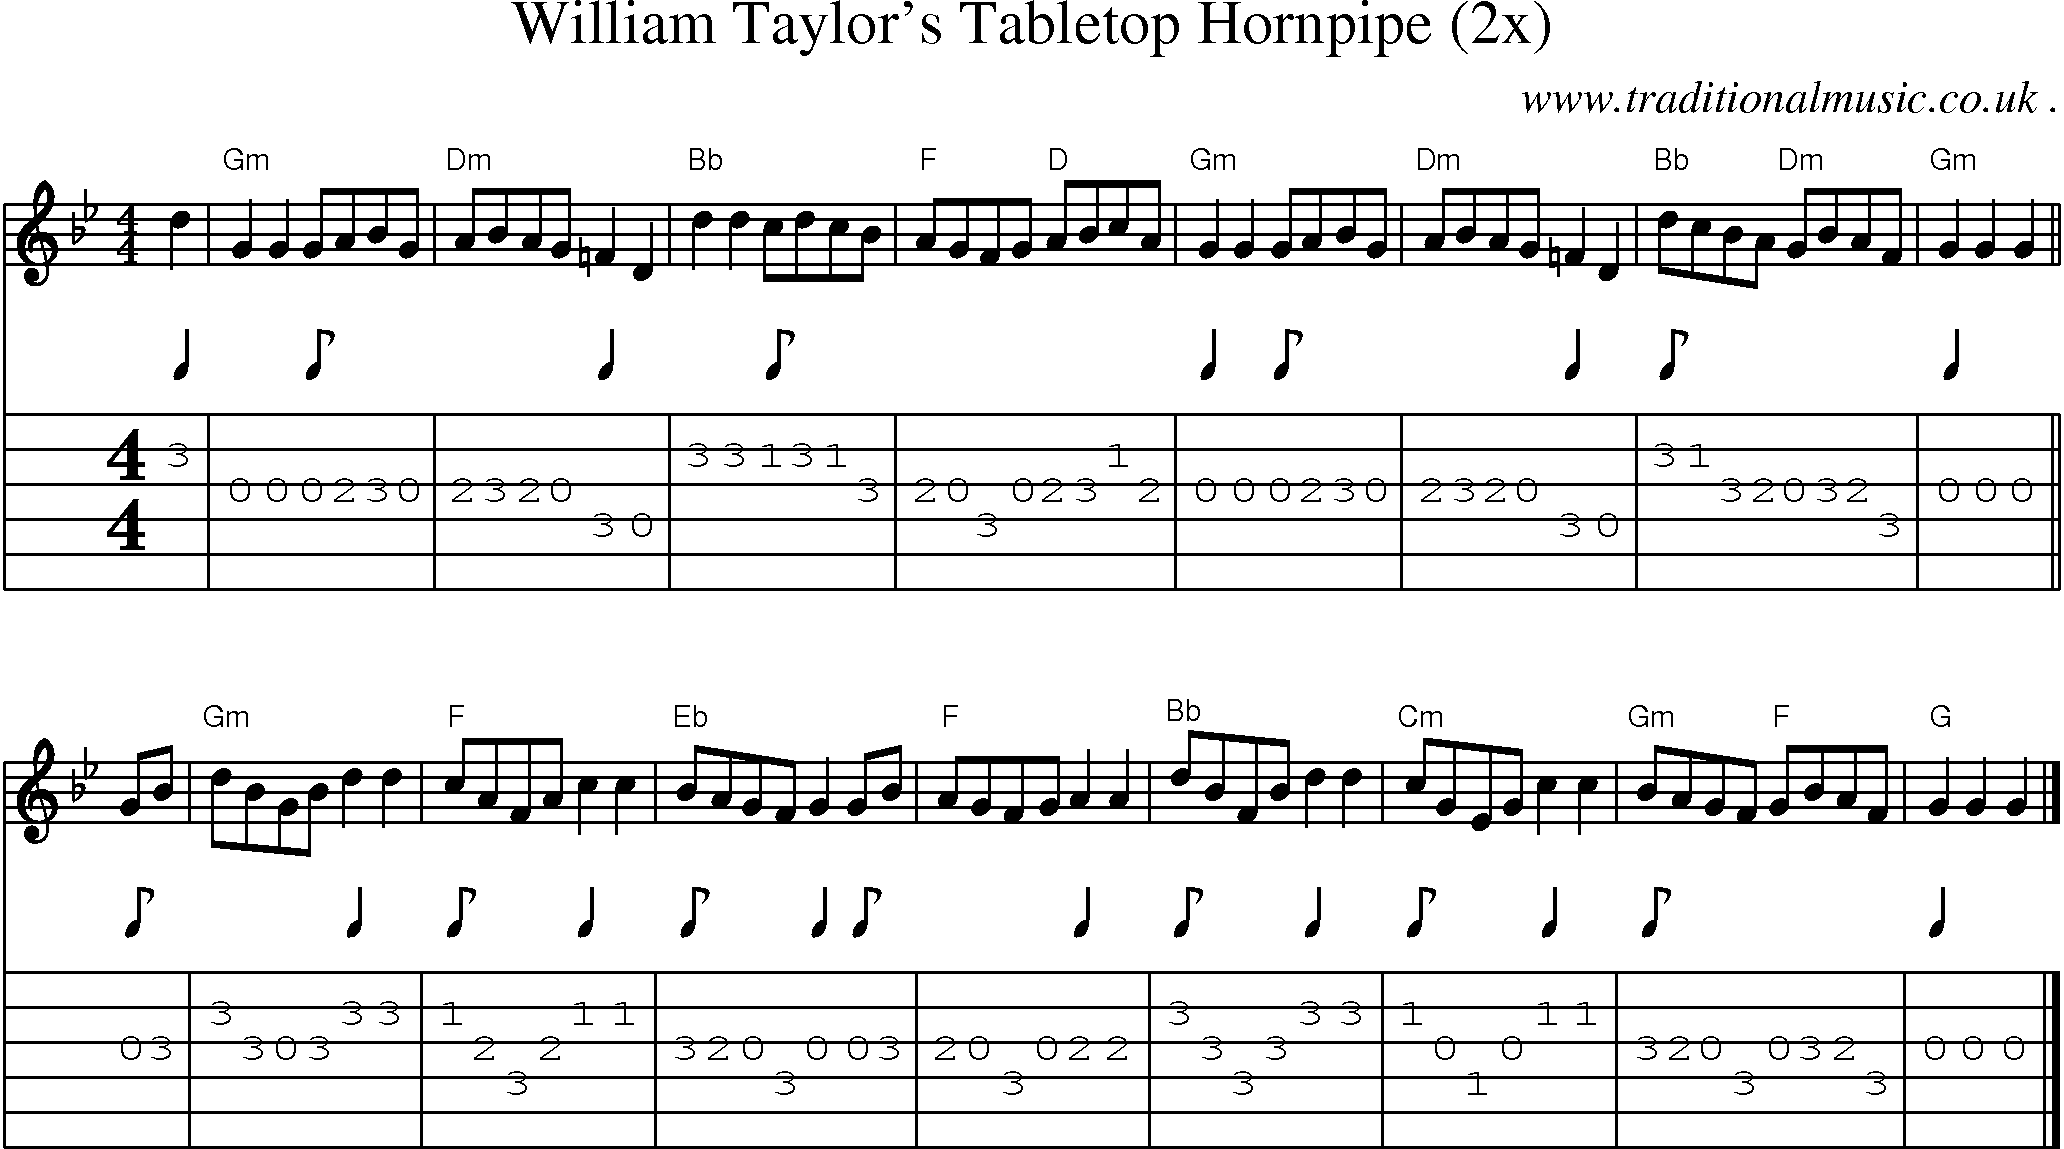 Sheet-music  score, Chords and Guitar Tabs for William Taylors Tabletop Hornpipe 2x